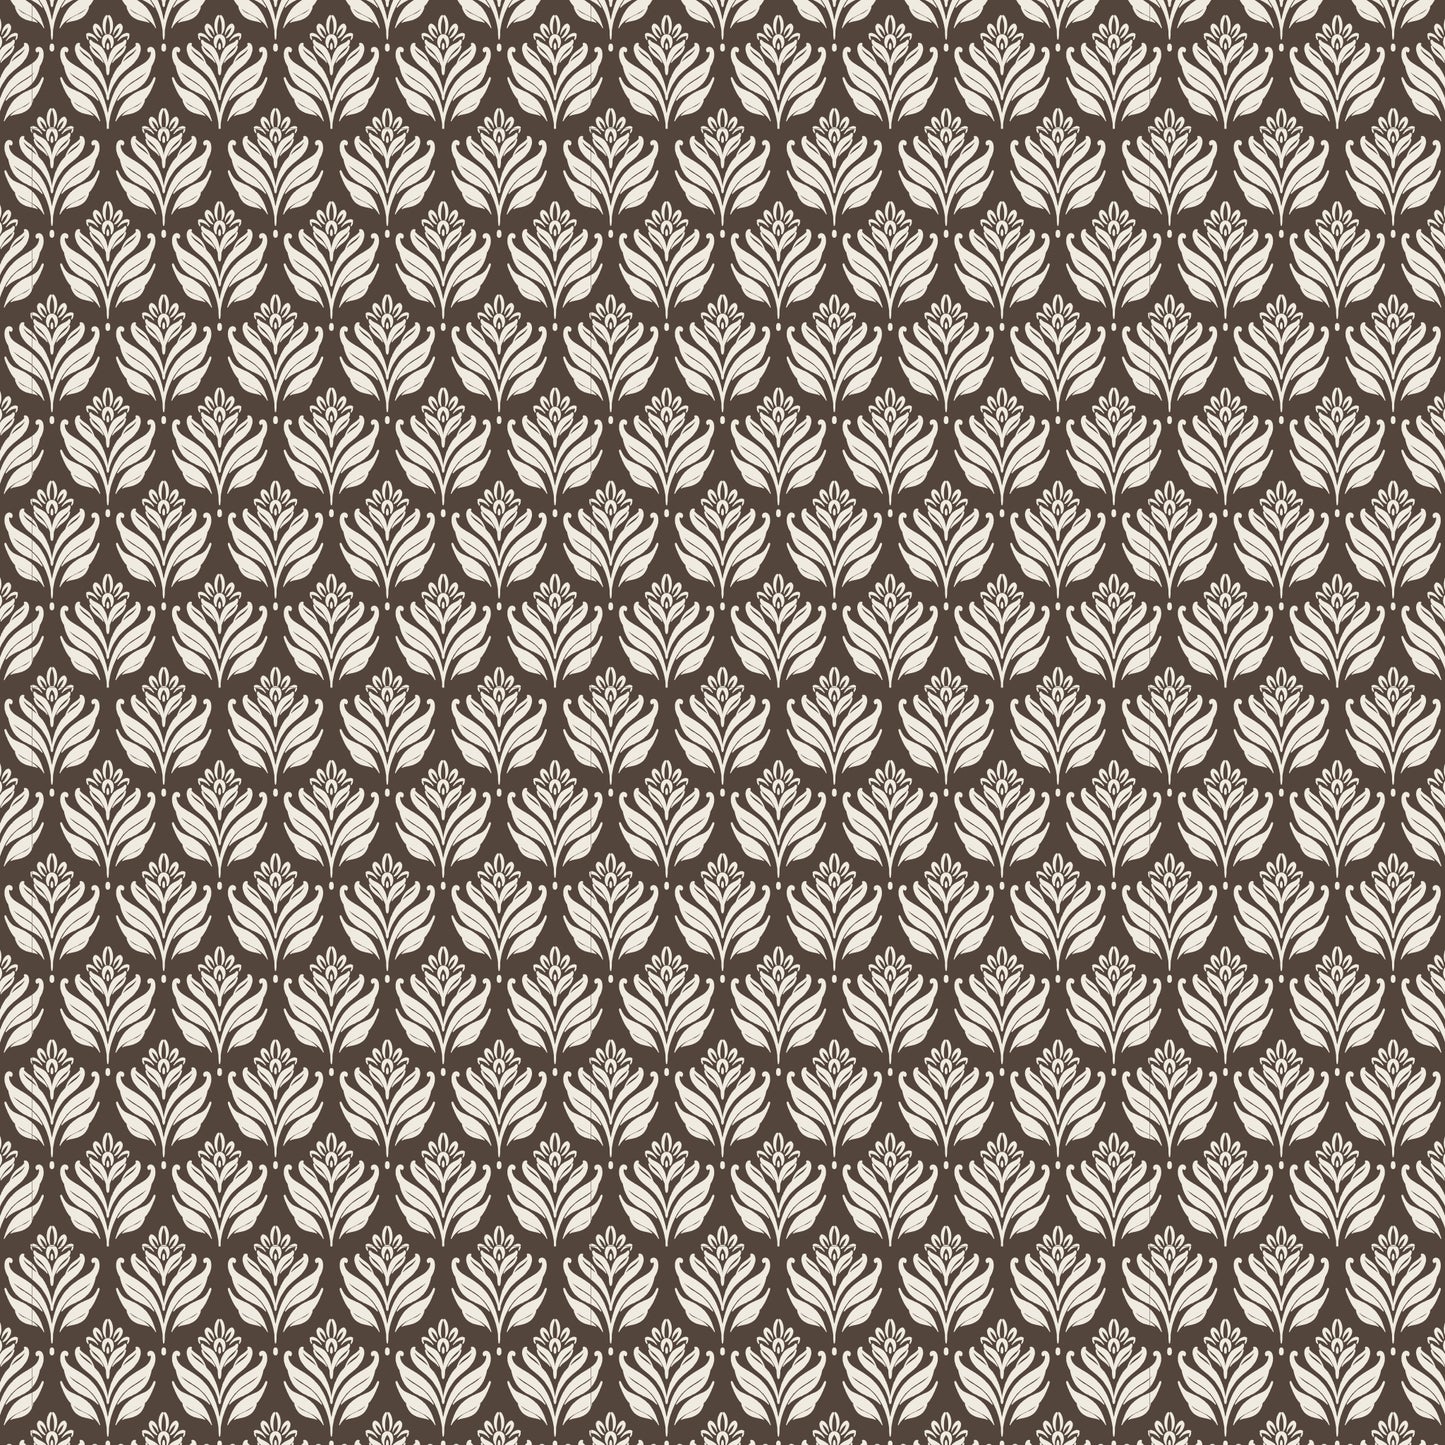 Introducing our Elegant Leaves Wallpaper in Walnut. These subtle leaves add a touch of sophistication to any space. Elevate your room with our premium wallpaper, designed for those with refined taste.